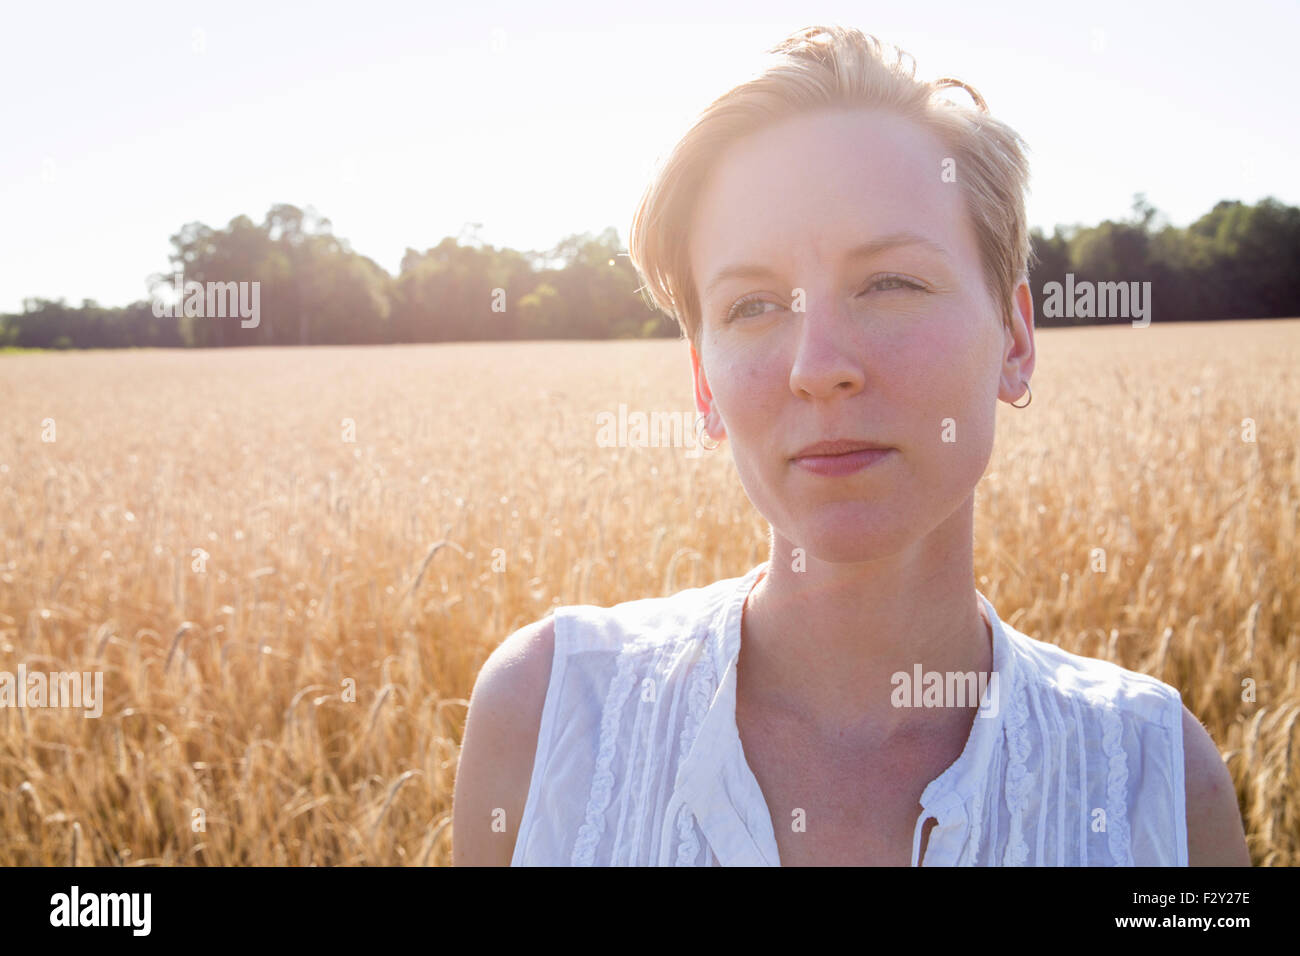 Head and shoulders portrait of a young woman standing in a cornfield. Stock Photo